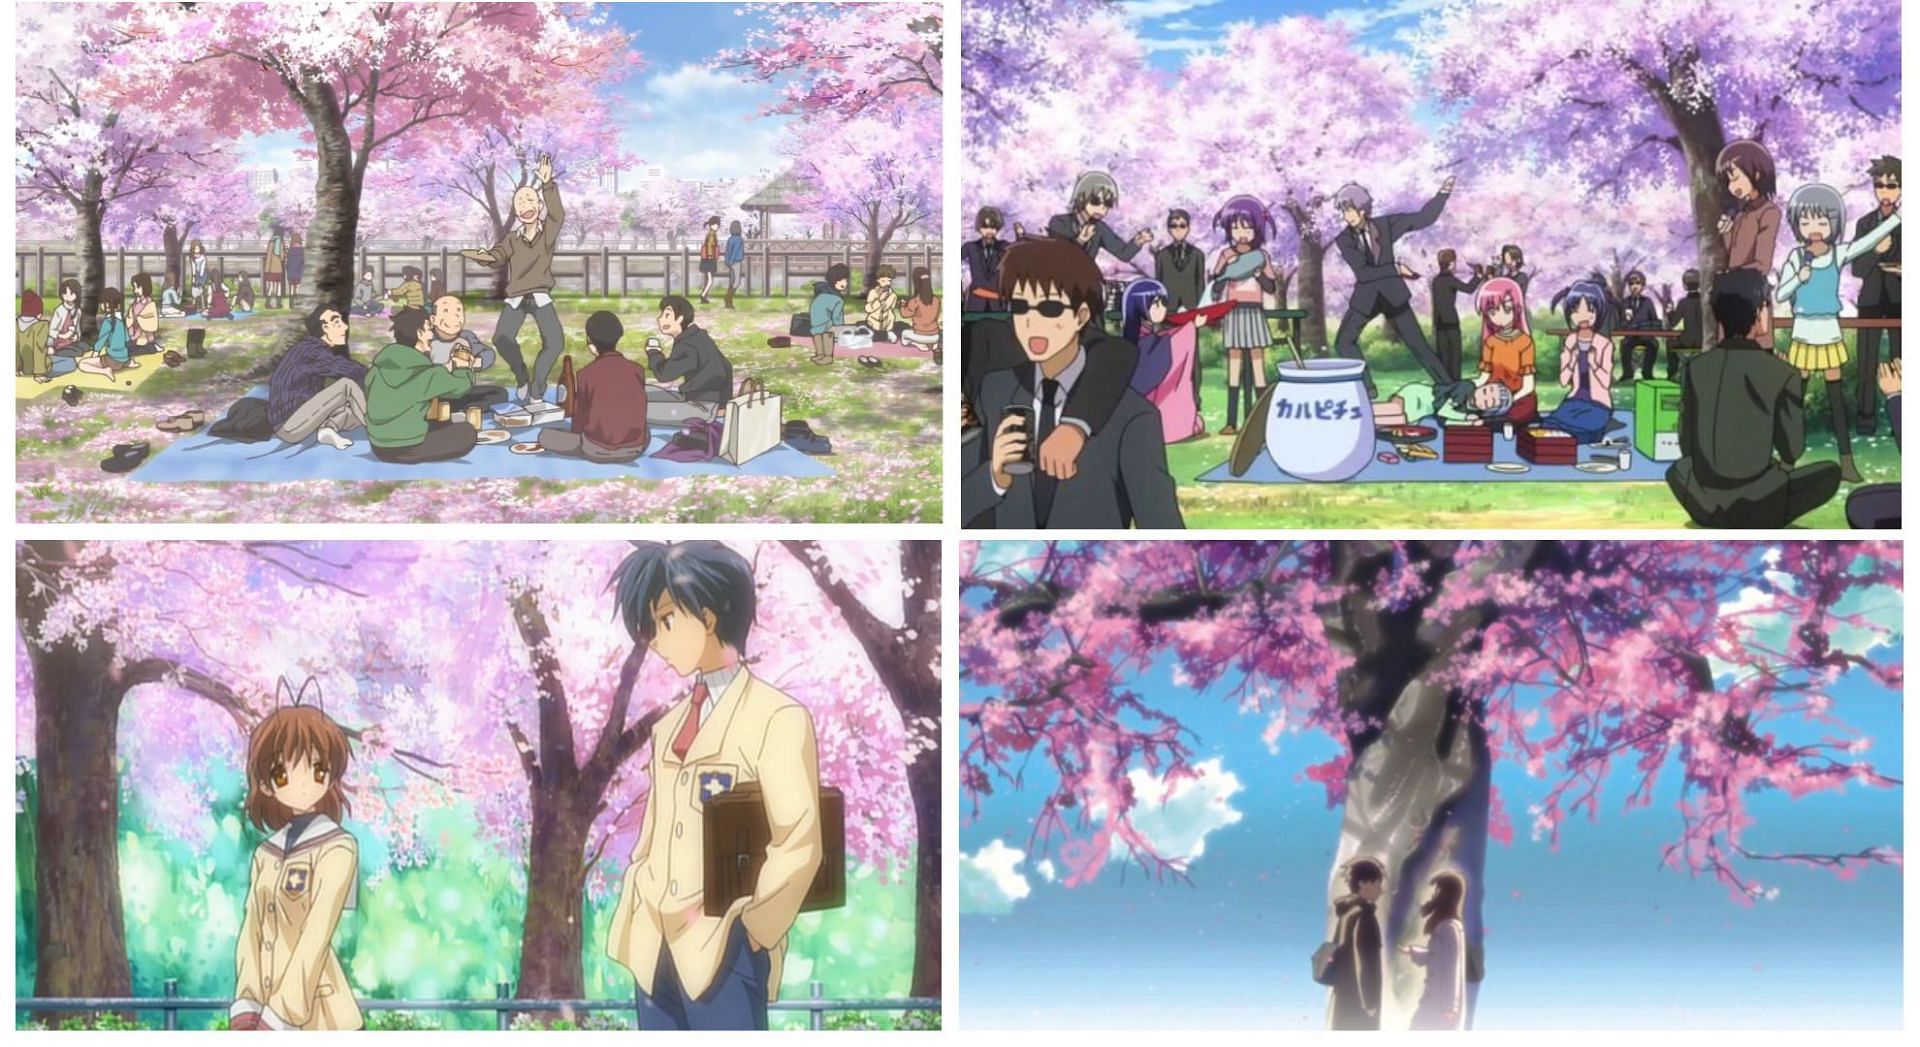 Sakura festivals featured in Amaama to Inazuma, Hayate the Combat Butler, Clannad, and Your Lie in April (Image via Sportskeeda)